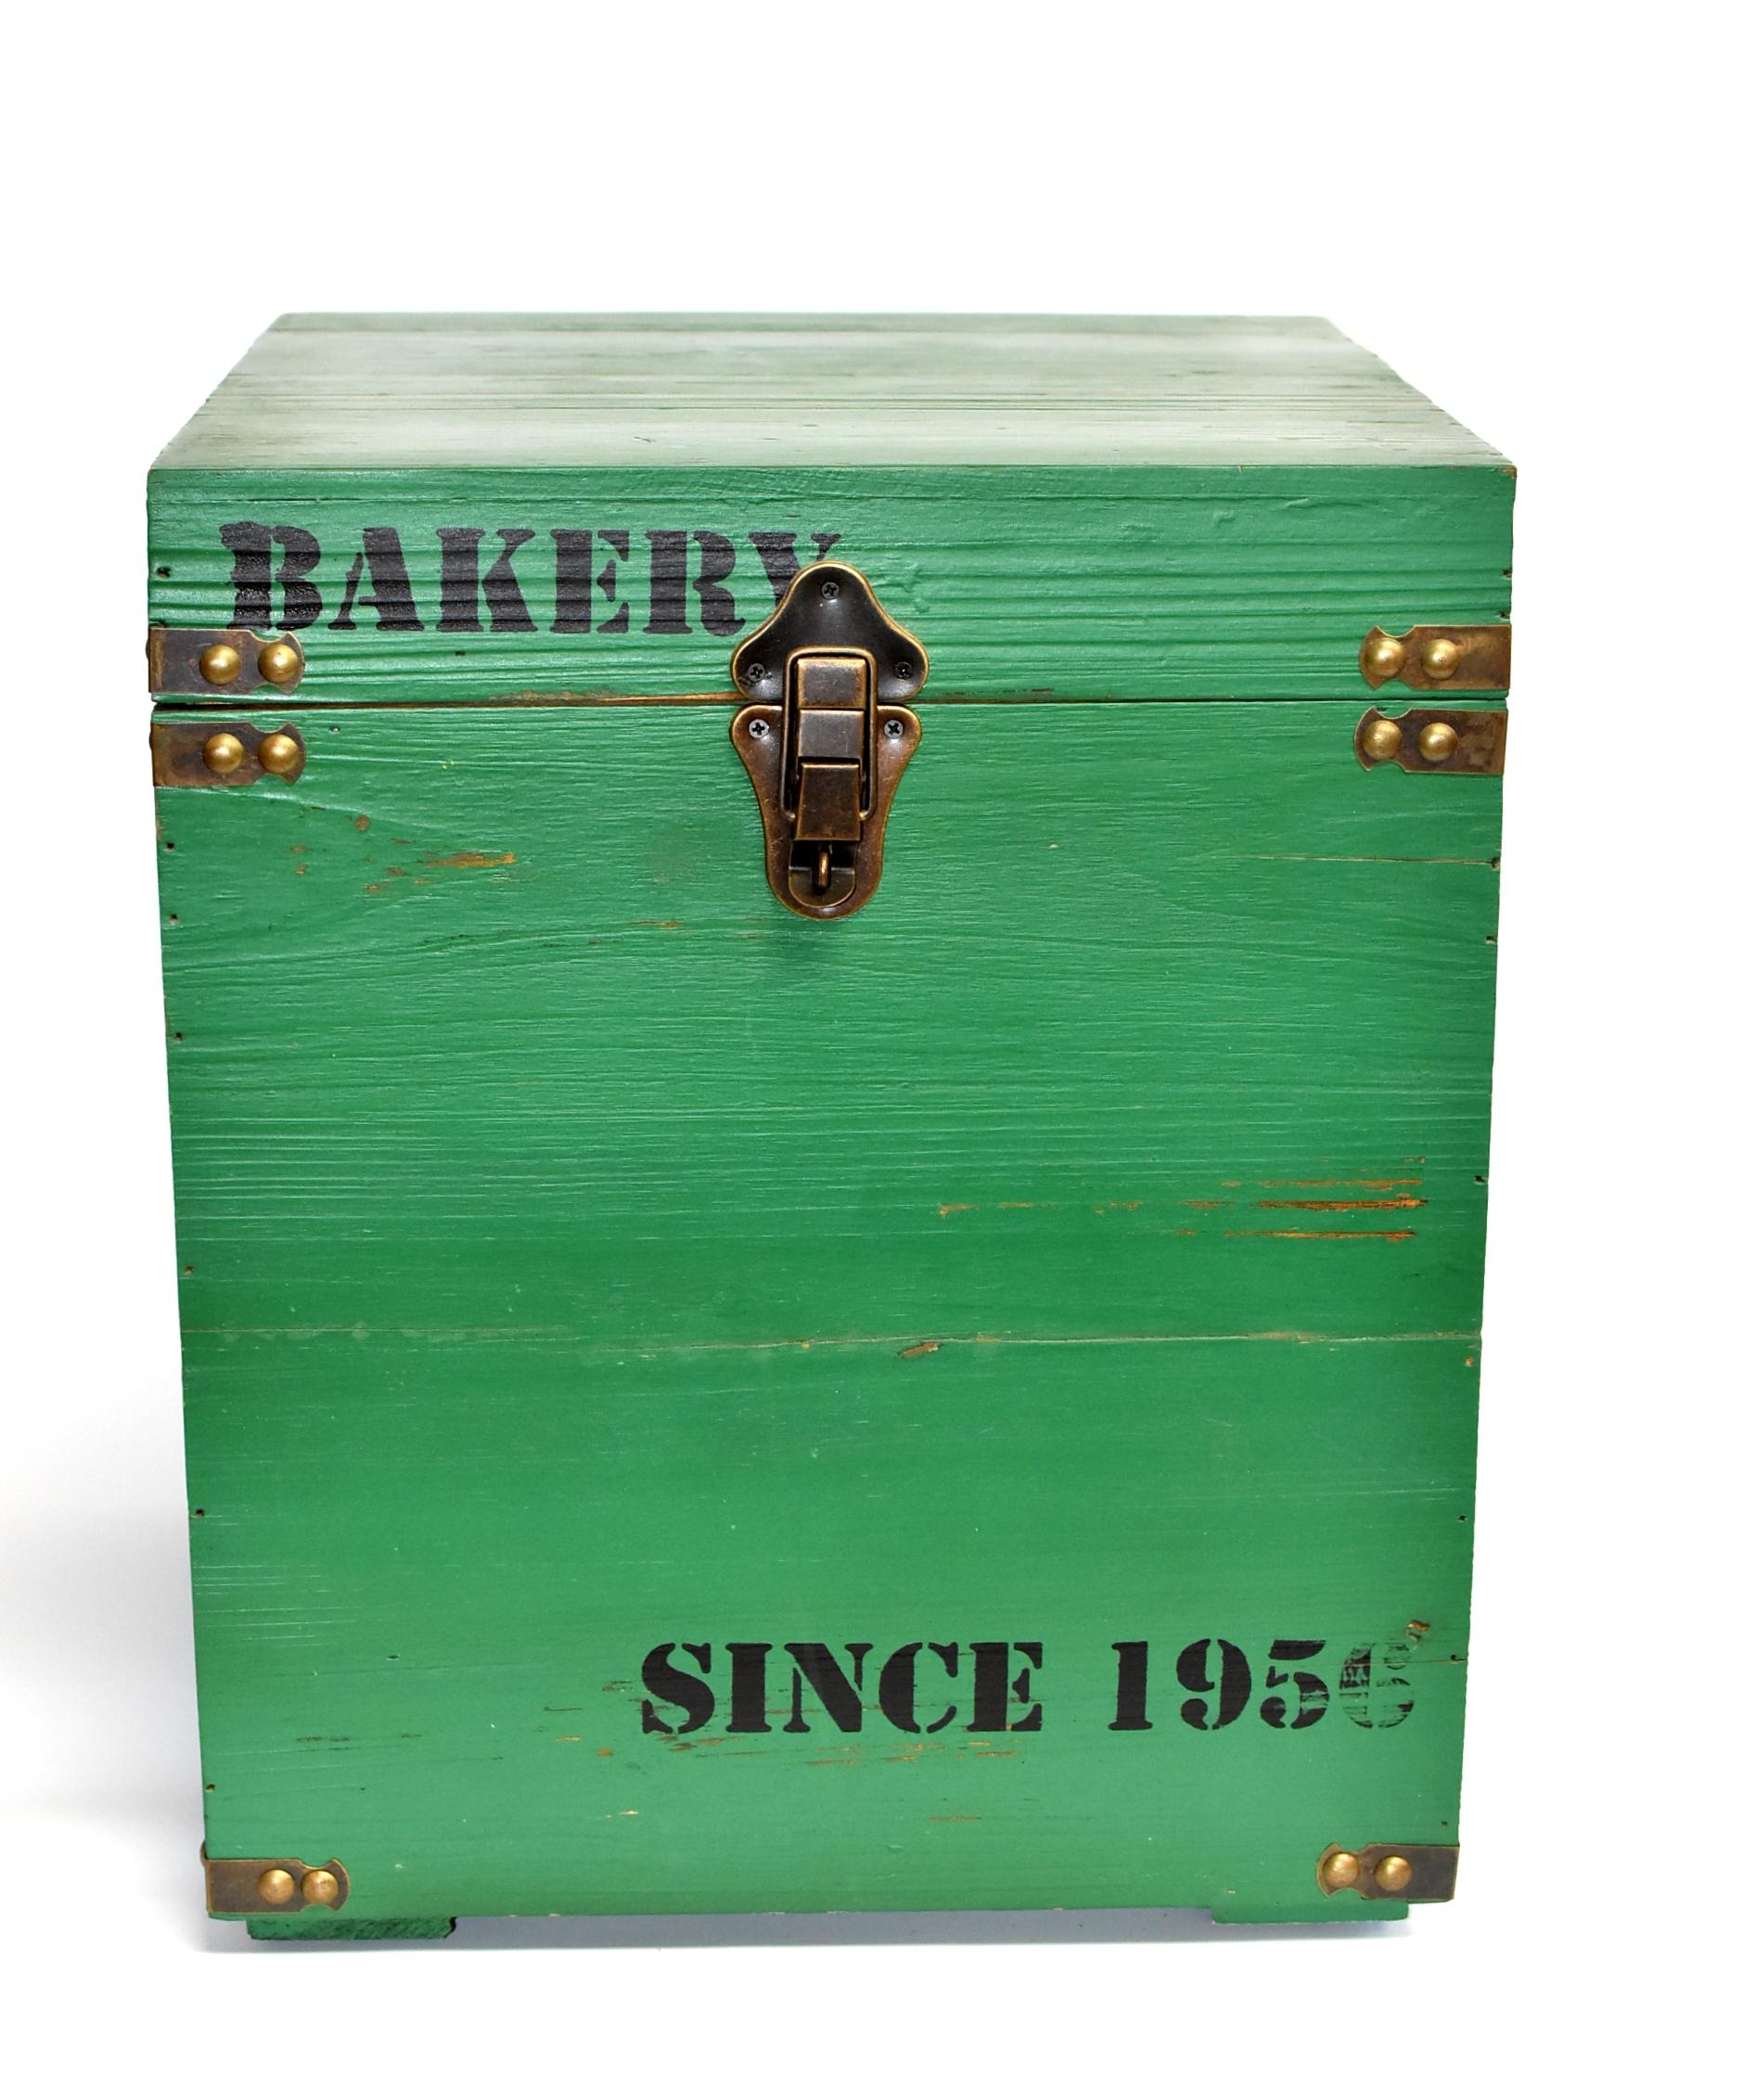 A brand new wooden box painted in beautiful green color. White stenciled 